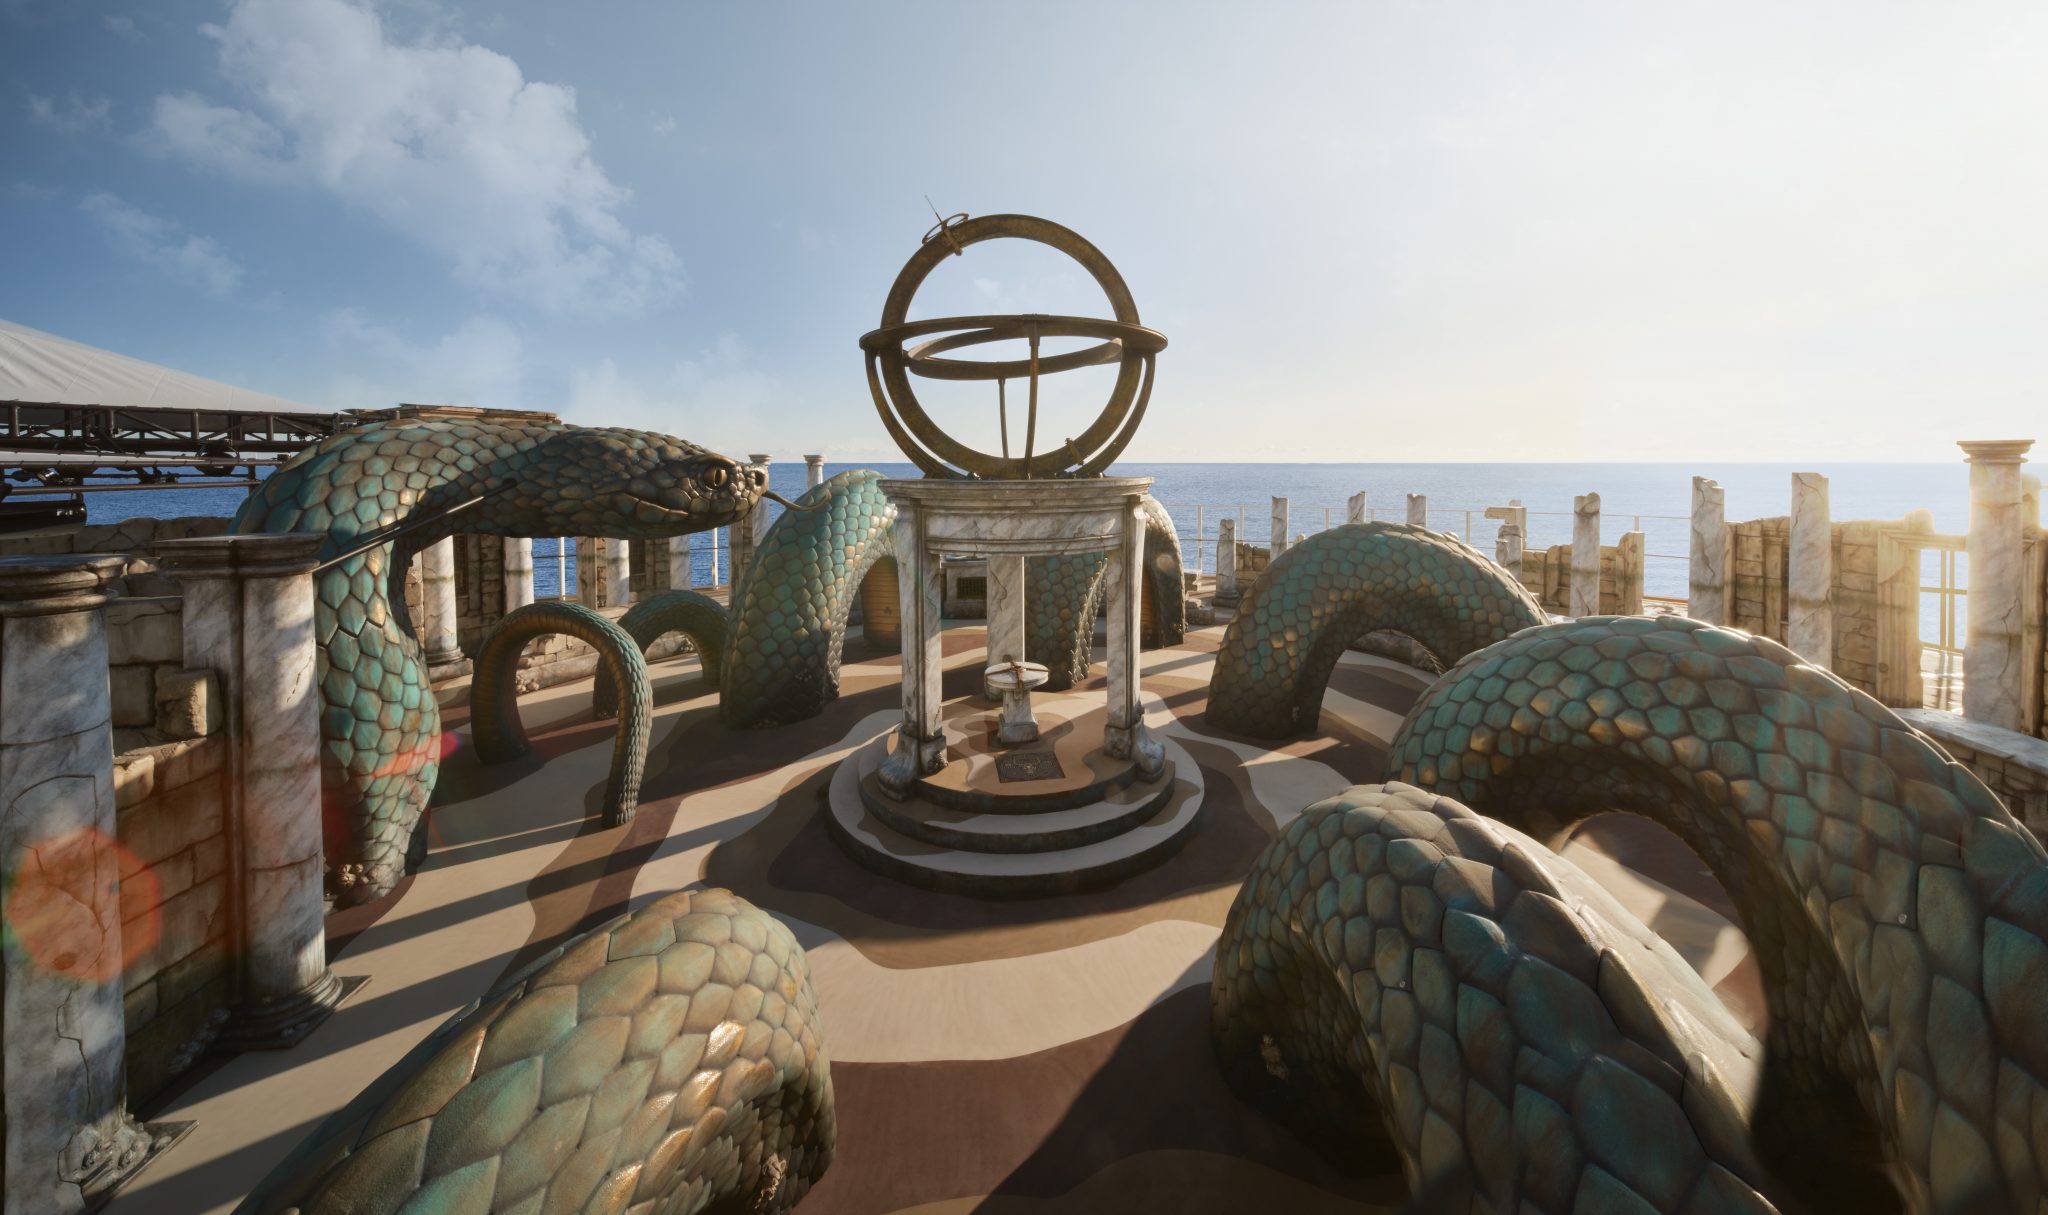 A breathtaking experience featuring large, intricately designed serpentine sculptures with iridescent blue-green scales winding around ancient-looking stone pillars and arches. At the center stands a prominent circular stone structure, with the vast ocean and a clear blue sky in the background."